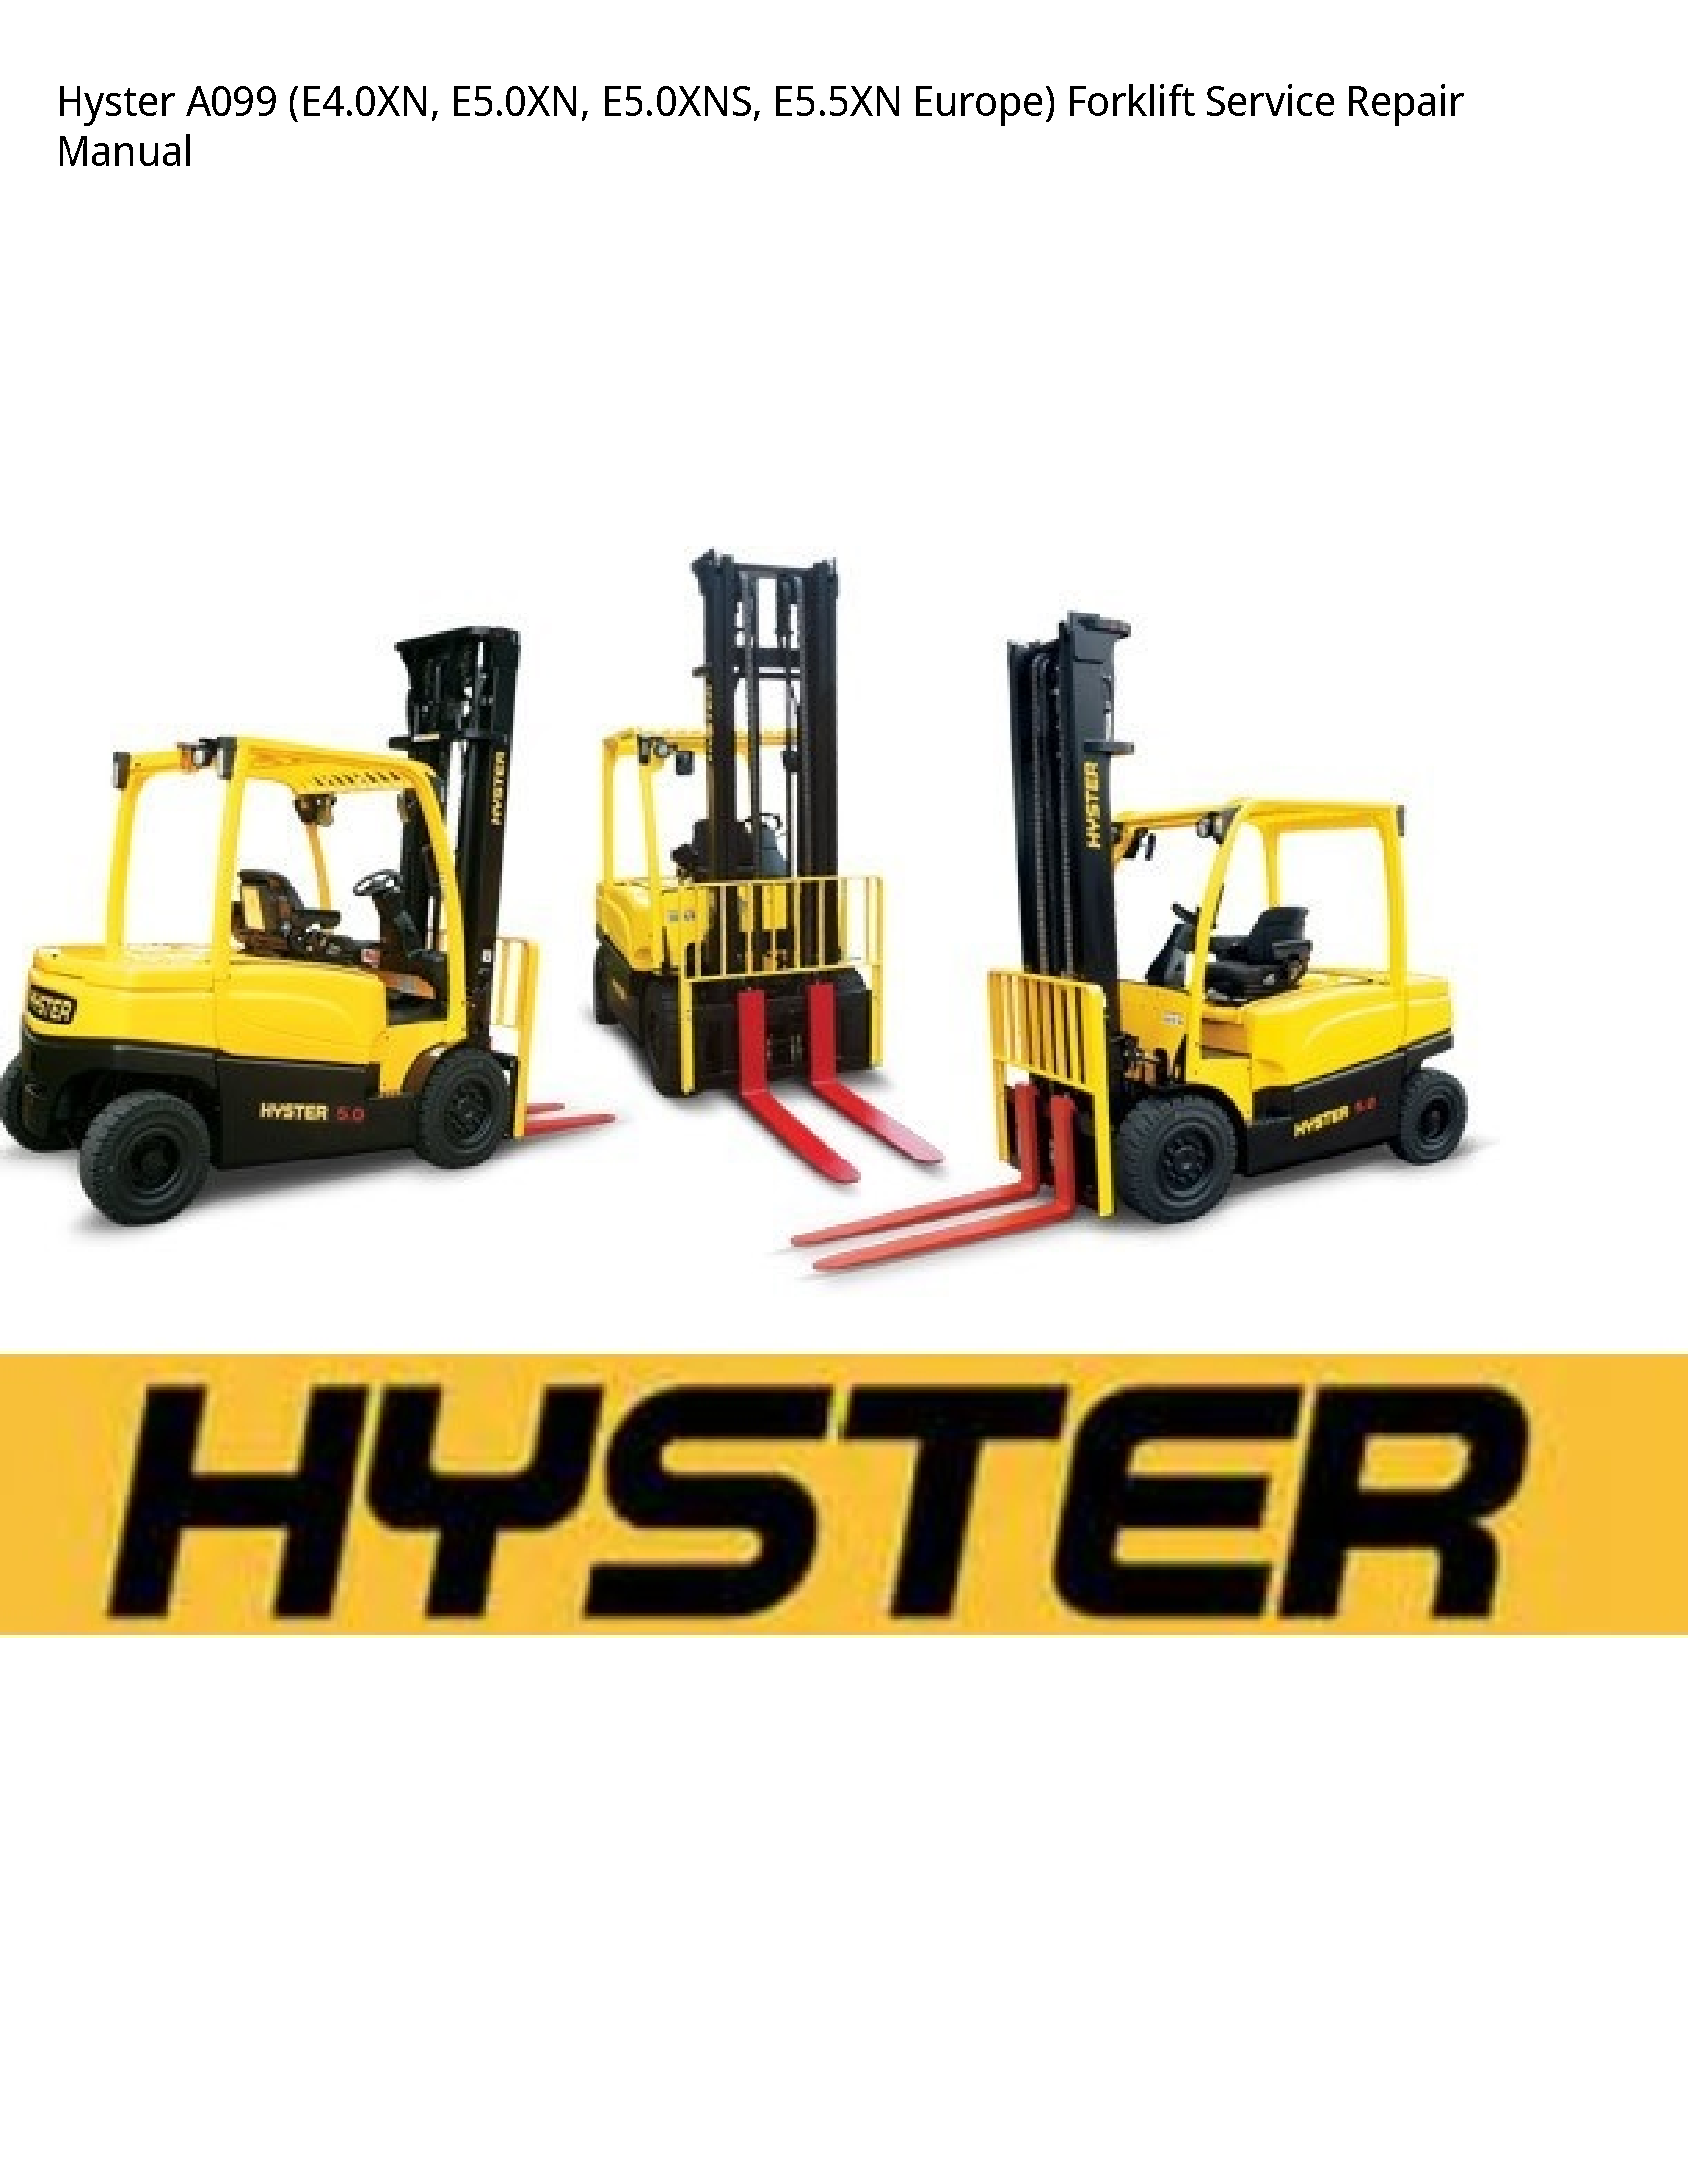 Hyster A099 Europe) Forklift manual